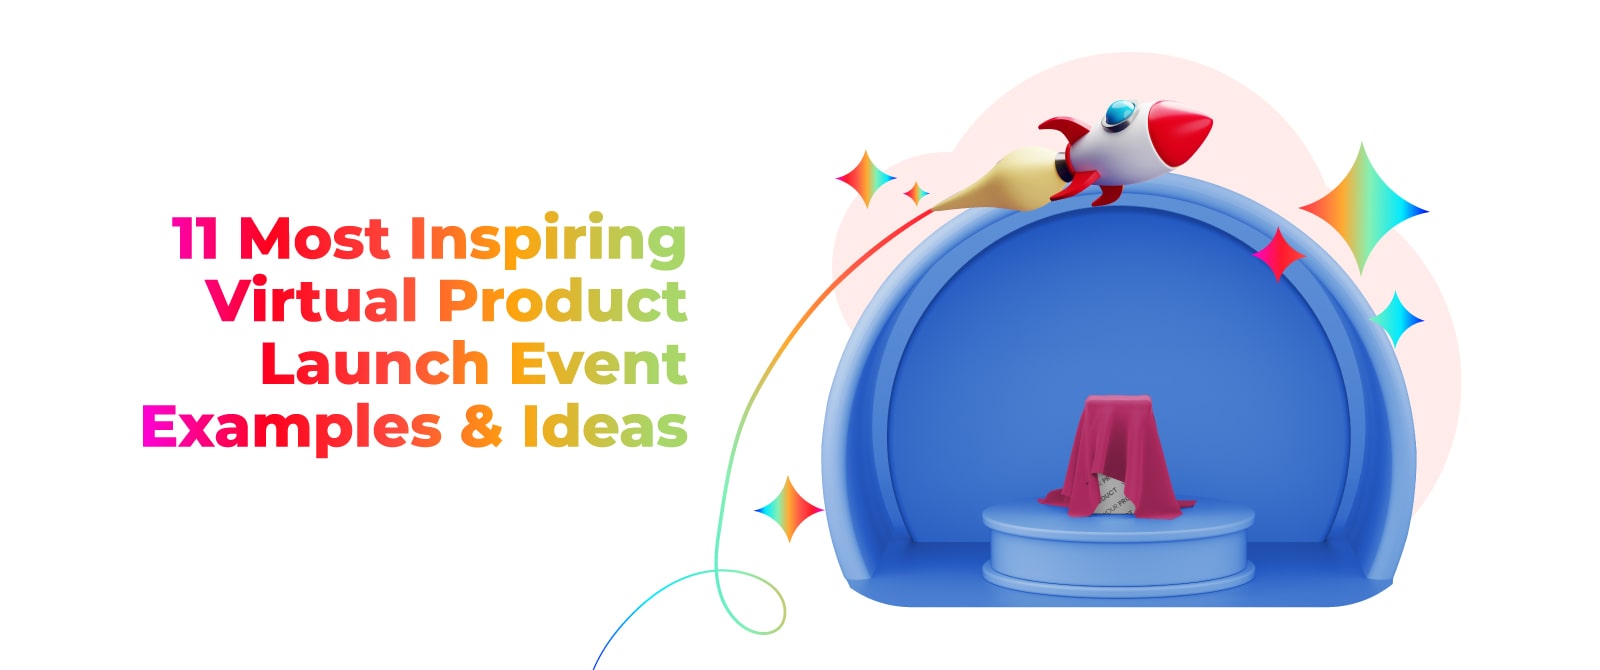 11 Most Inspiring Virtual Product Launch Event Examples & Ideas